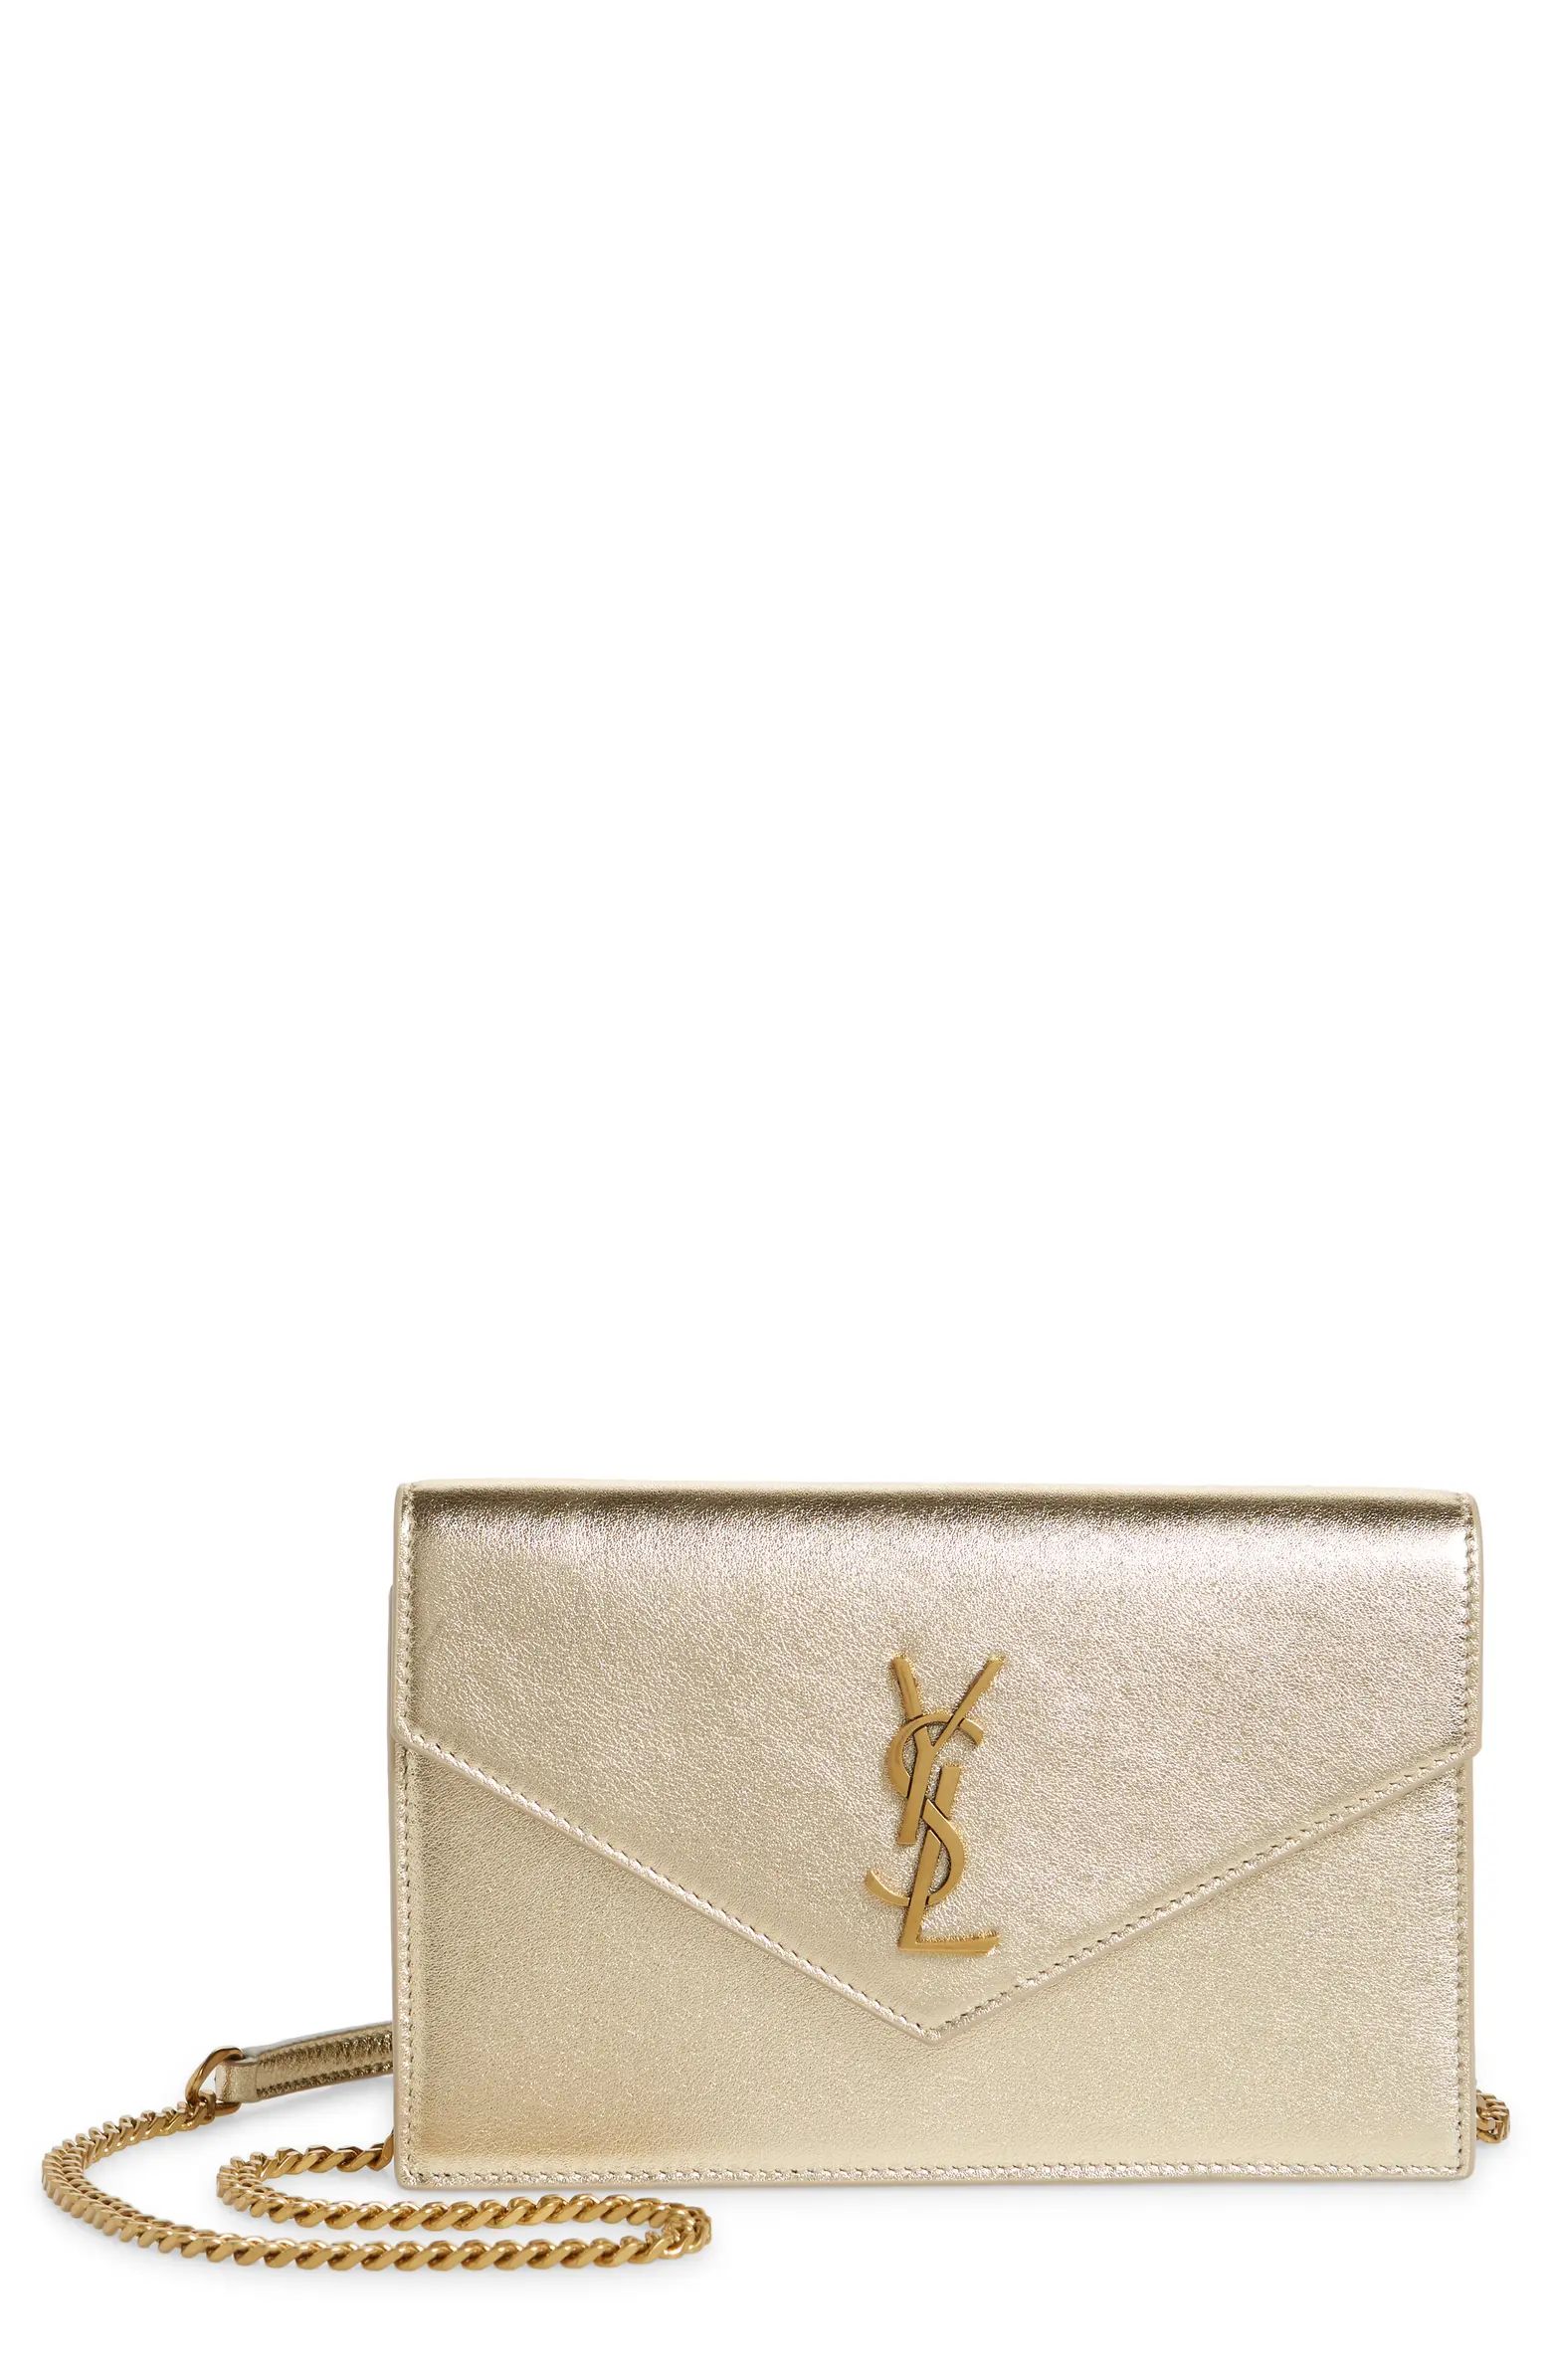 Saint Laurent Metallic Leather Wallet on a Chain | Nordstrom | Nordstrom